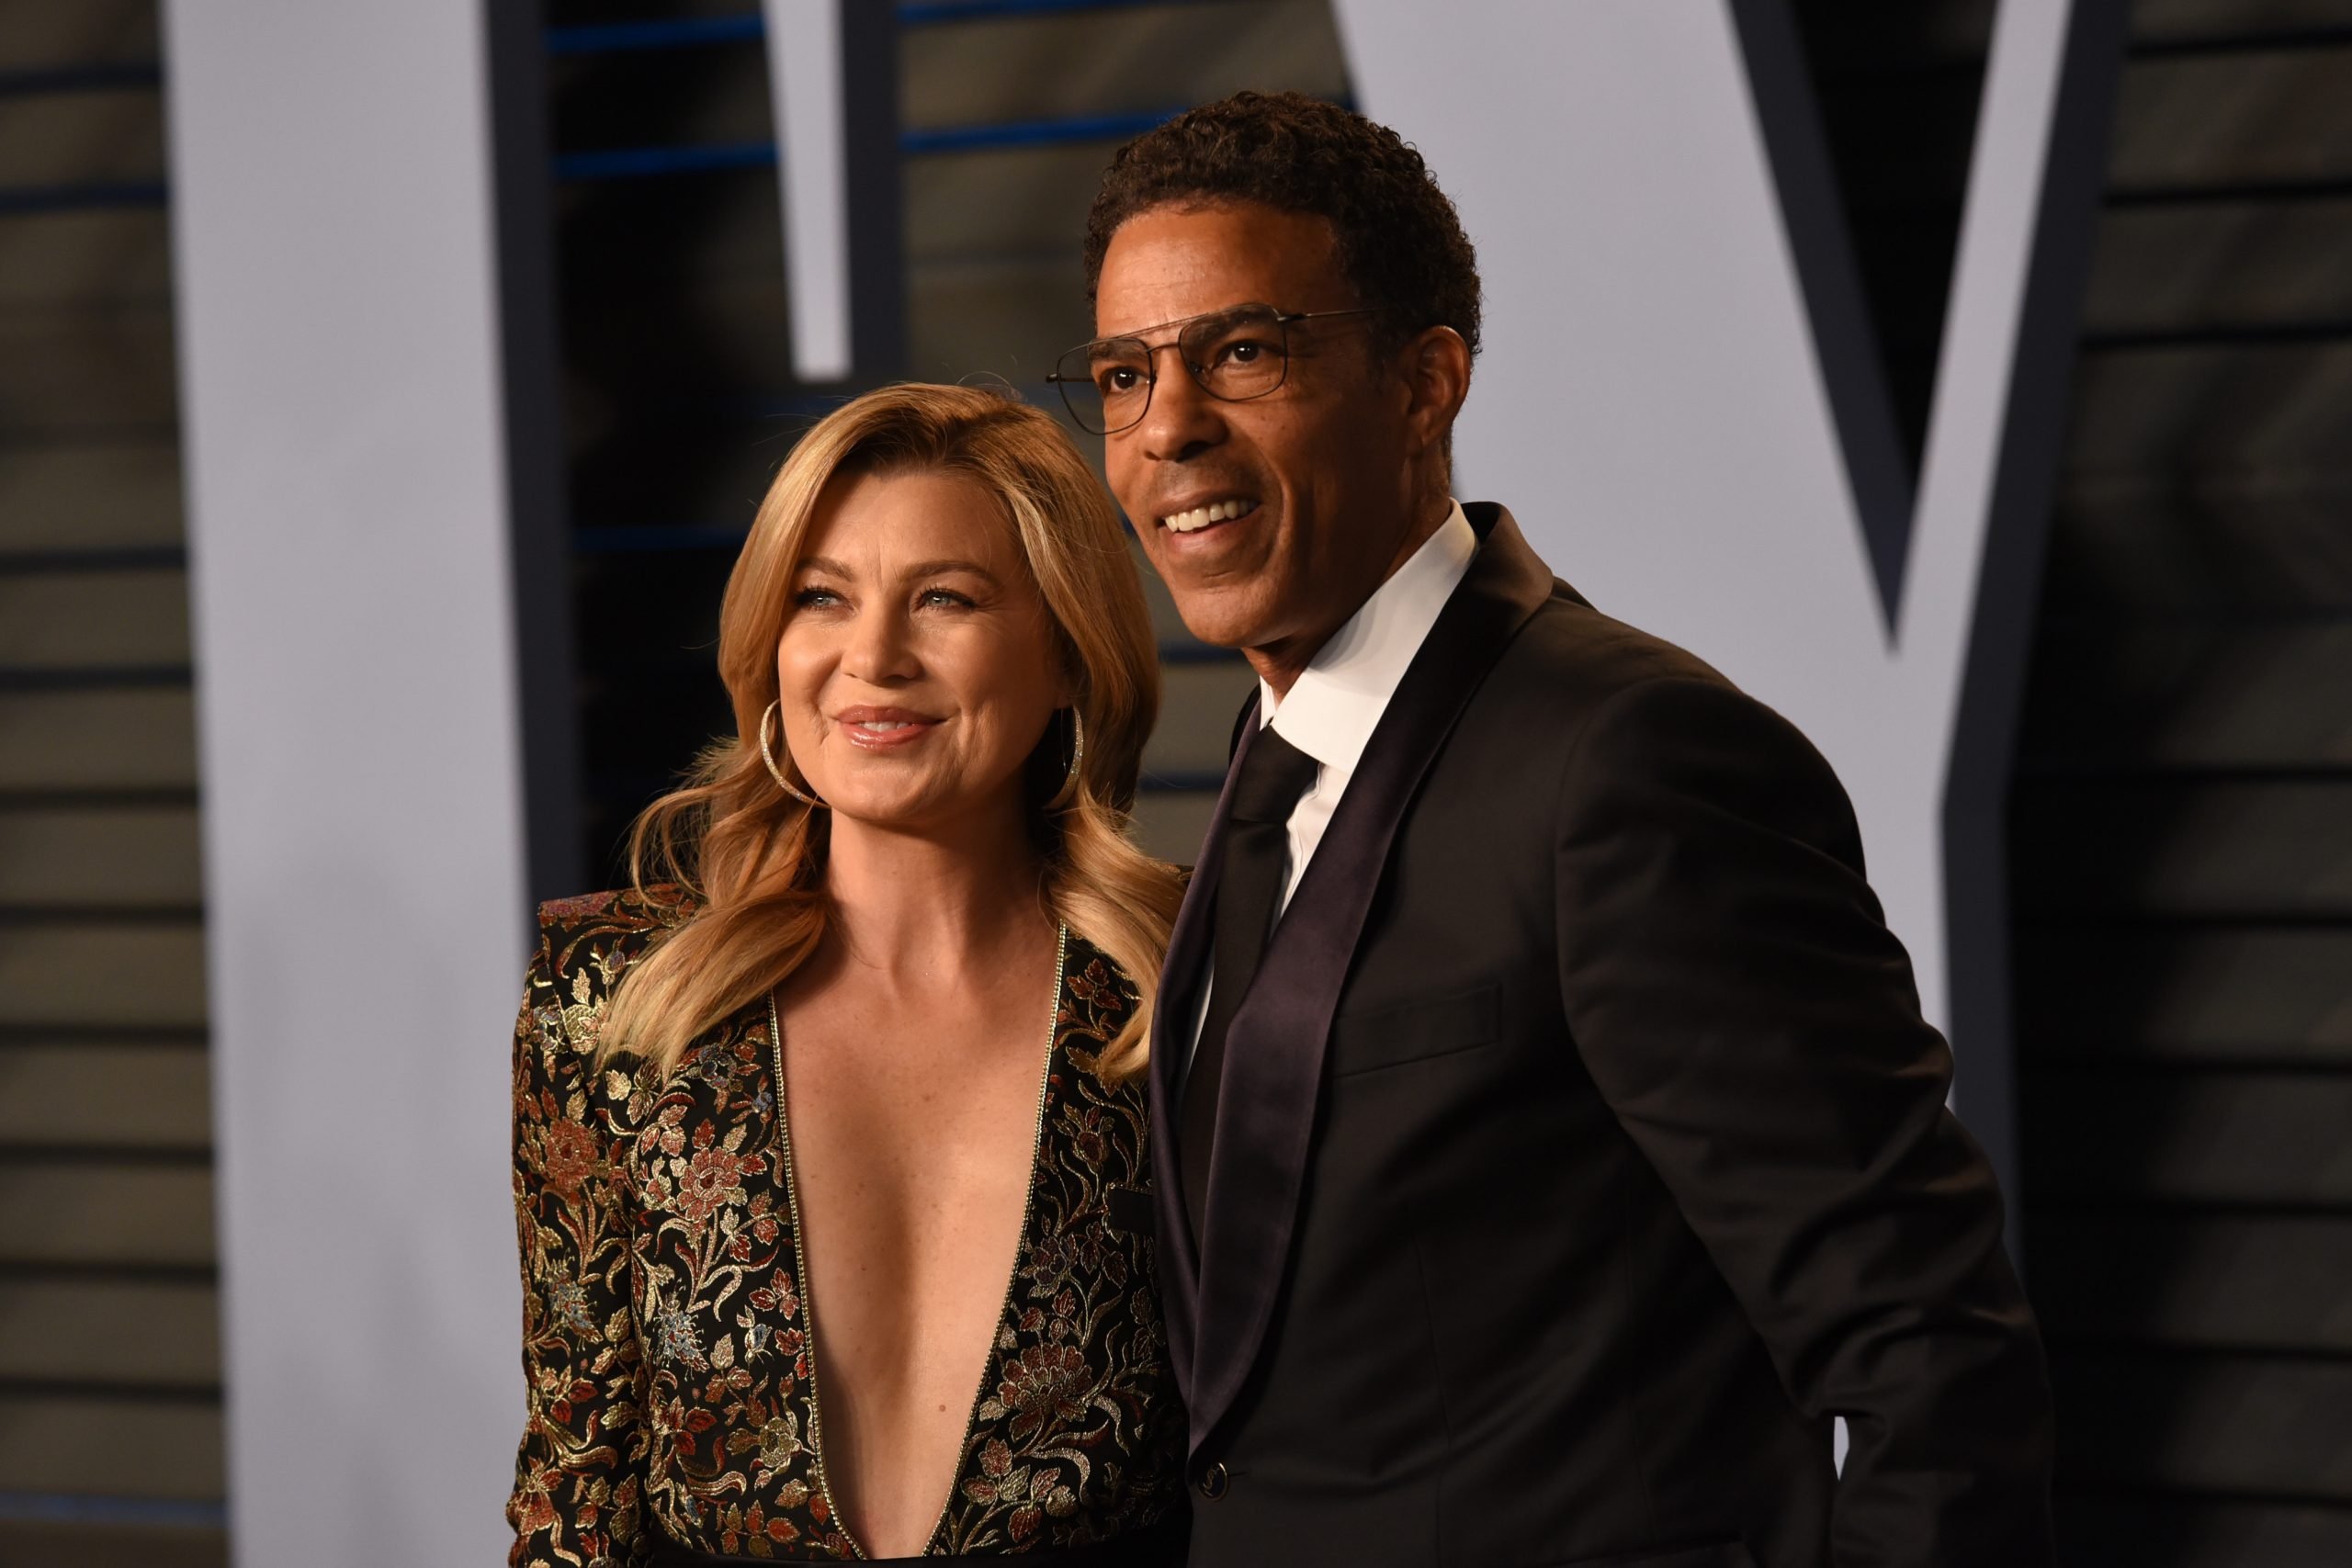 Ellen Pompeo wears a low cut dress and Chris Ivery wears a suit on the carpet of the 2018 Vanity Fair Oscar Party